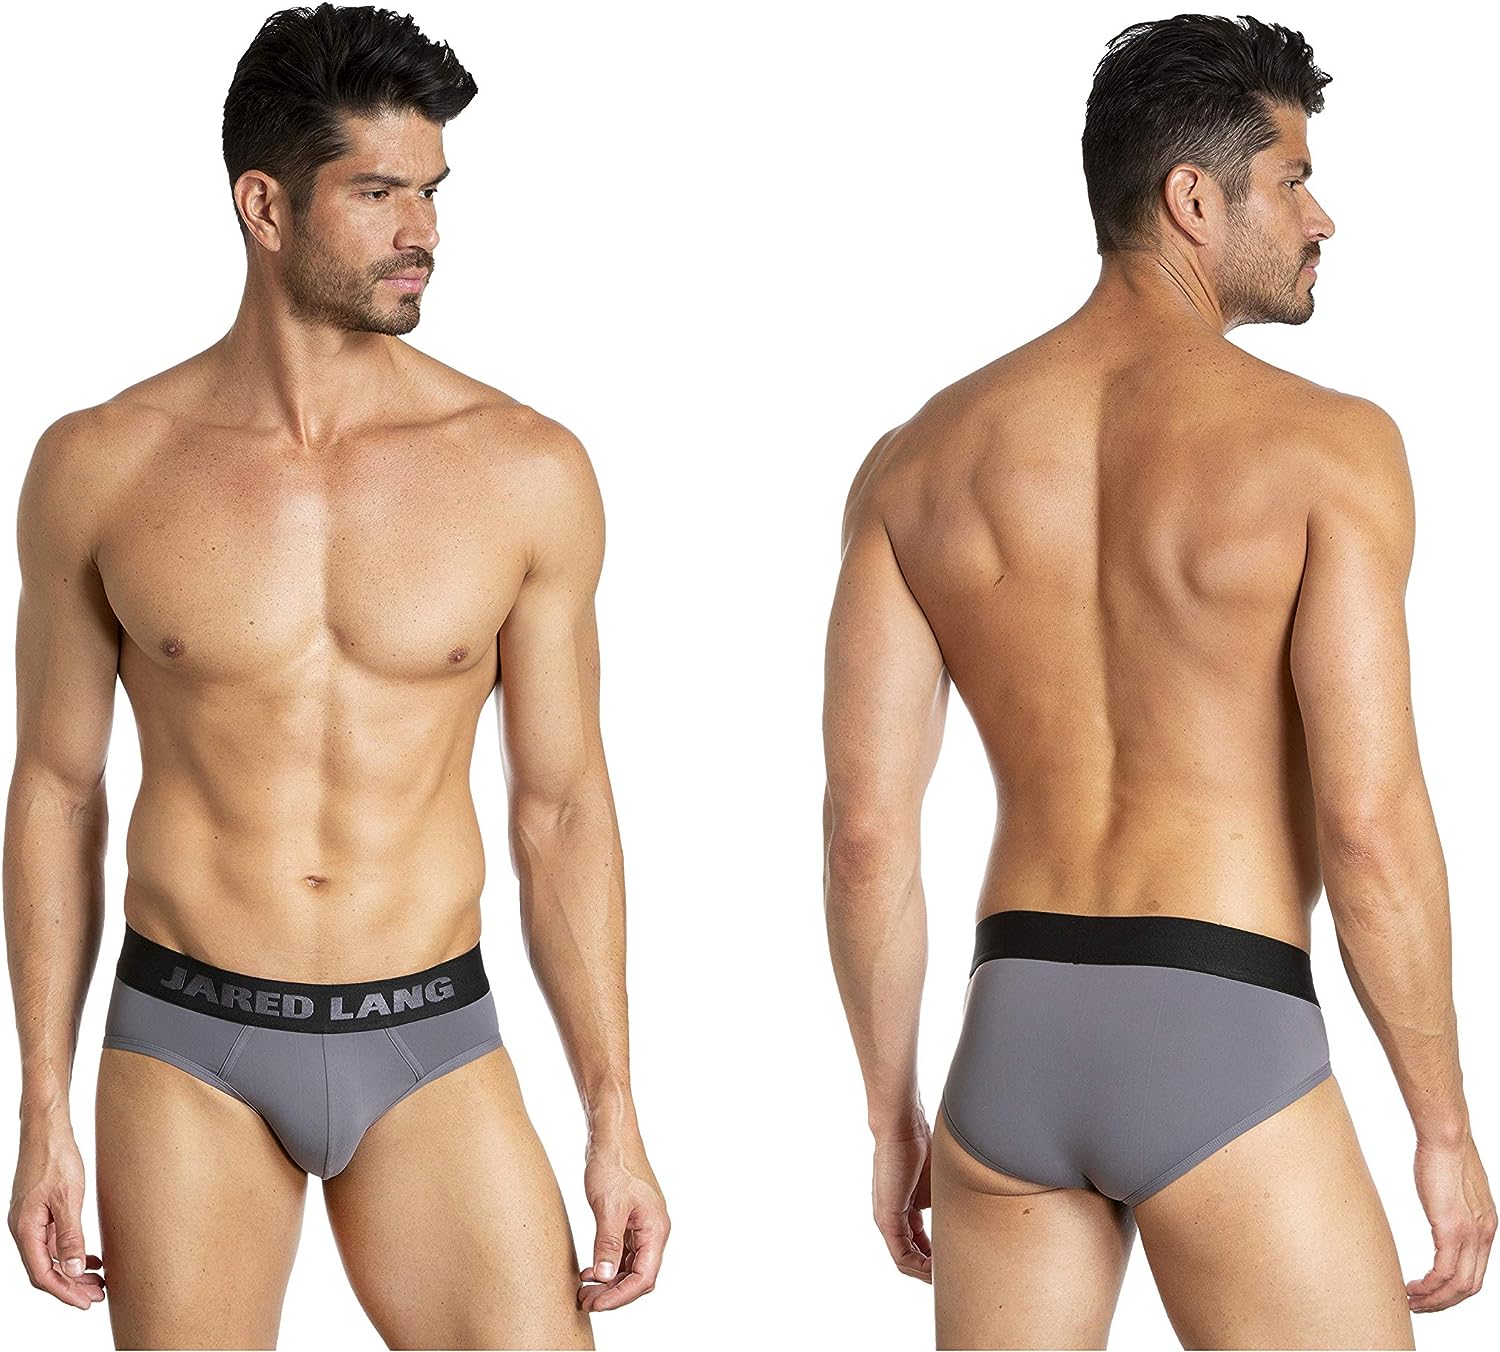 What Is The Flap In Men’s Underwear For